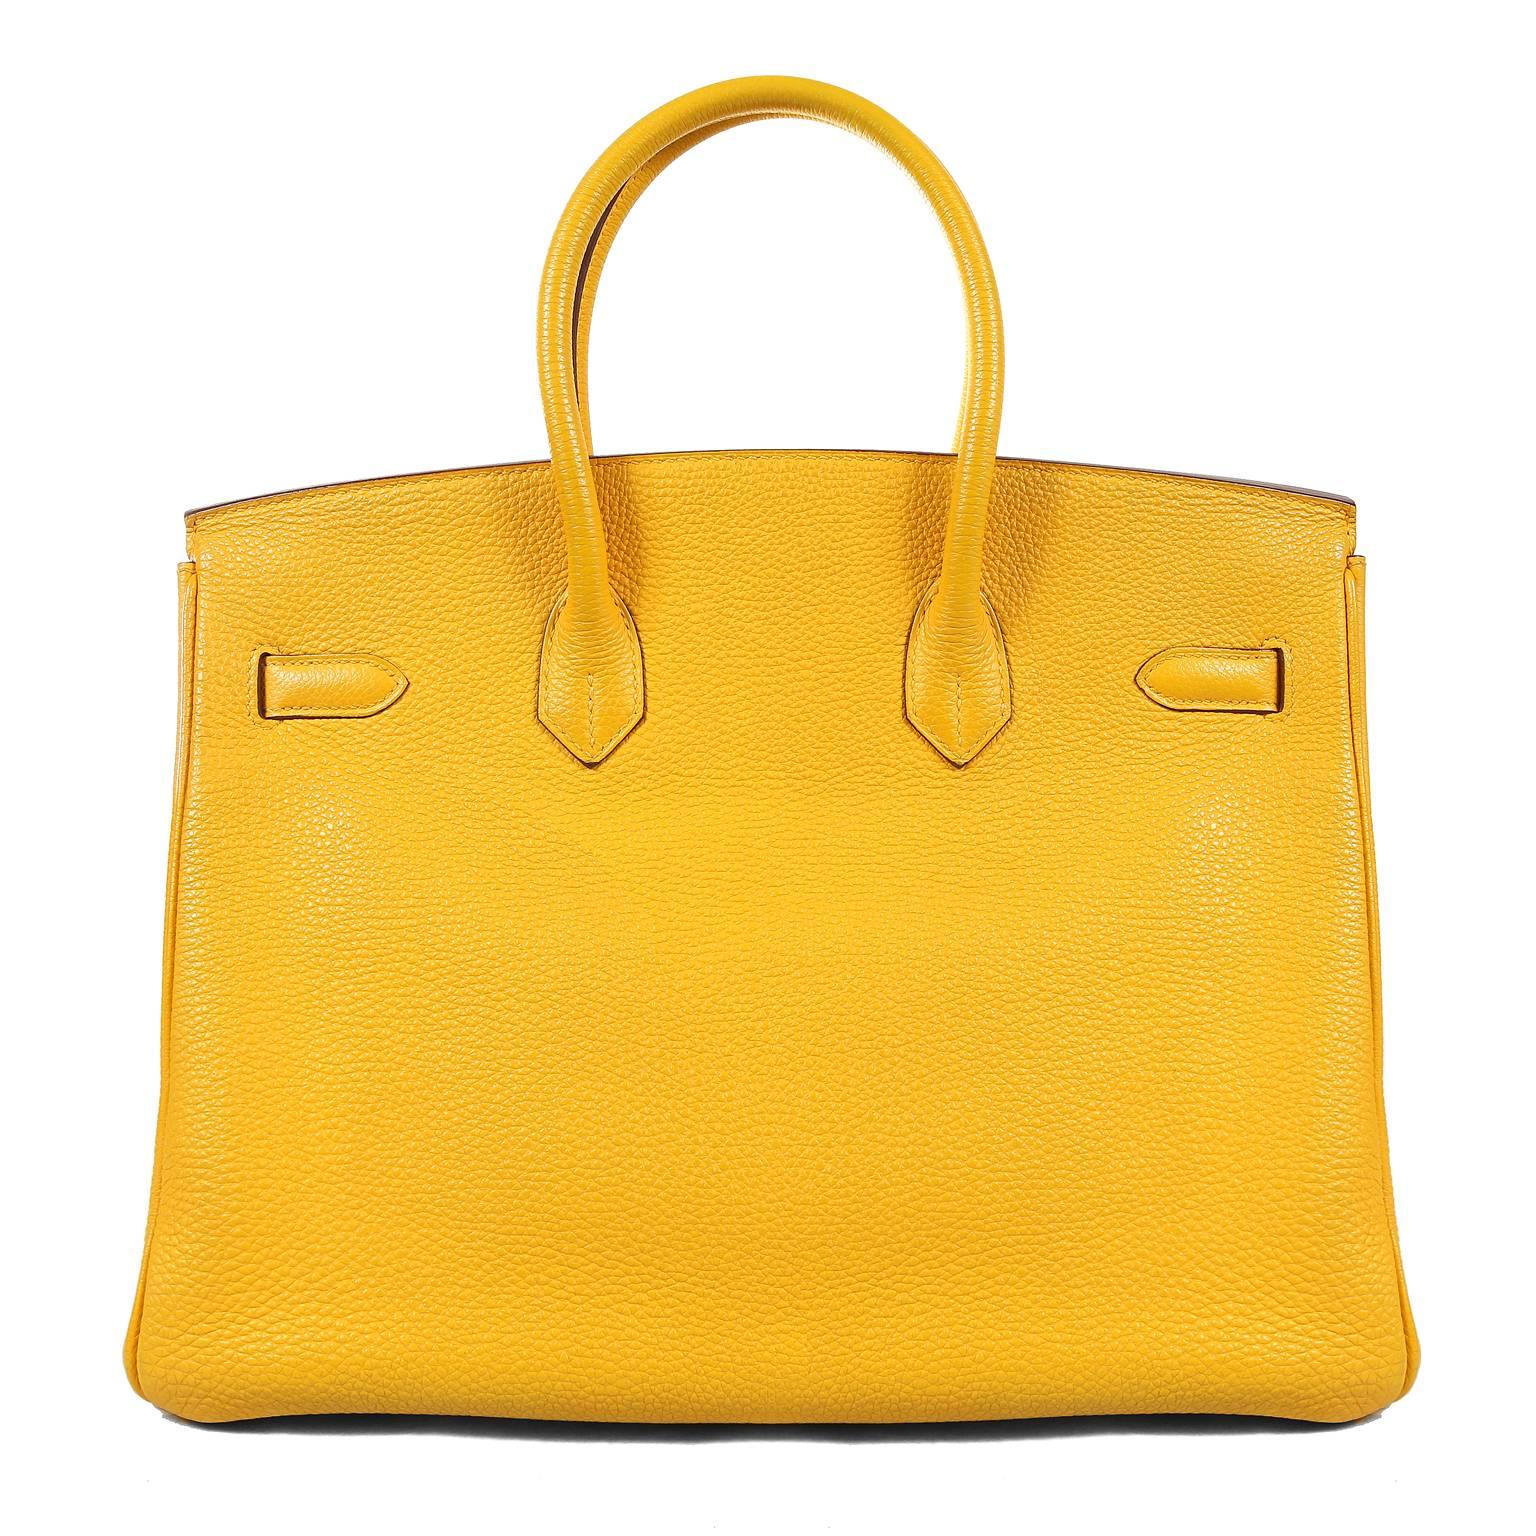 Hermès Soleil Togo 35cm Birkin Bag-  Pristine condition;  appears never carried.  
 Waitlists exceeding a year are commonplace for the intensely coveted Birkin bag.  Each piece is hand crafted by skilled artisans and represents the epitome of